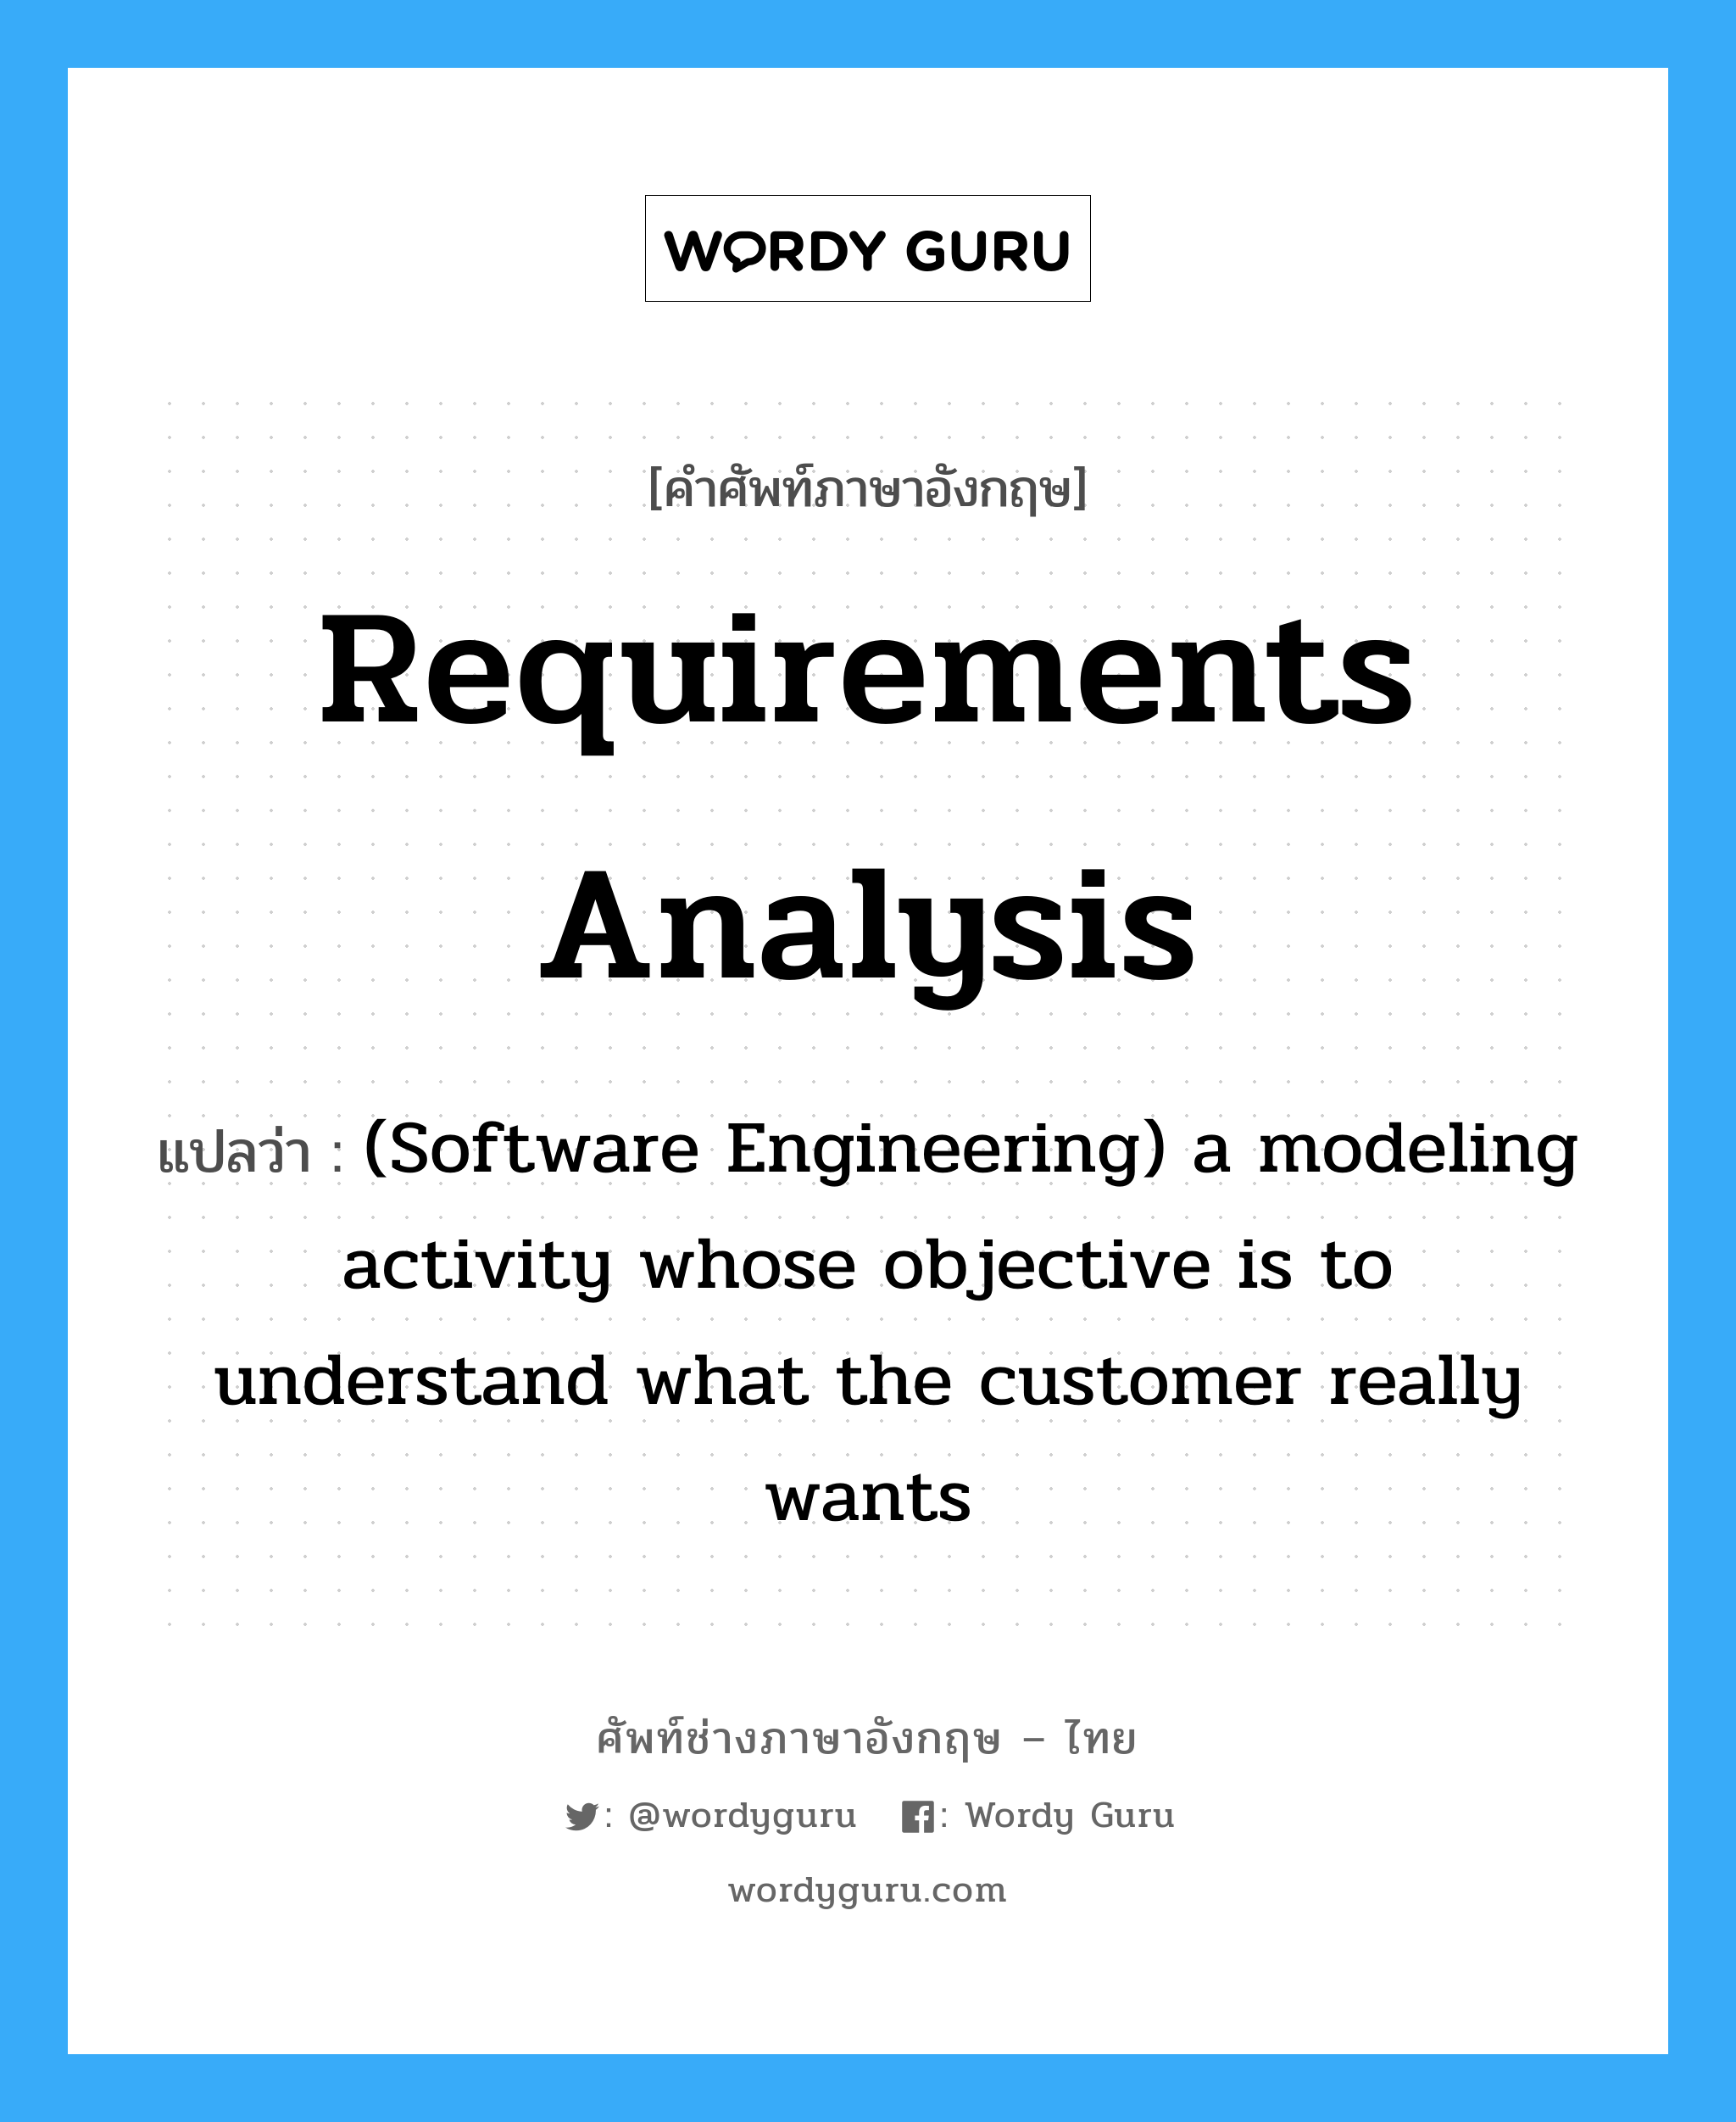 Requirements analysis แปลว่า?, คำศัพท์ช่างภาษาอังกฤษ - ไทย Requirements analysis คำศัพท์ภาษาอังกฤษ Requirements analysis แปลว่า (Software Engineering) a modeling activity whose objective is to understand what the customer really wants